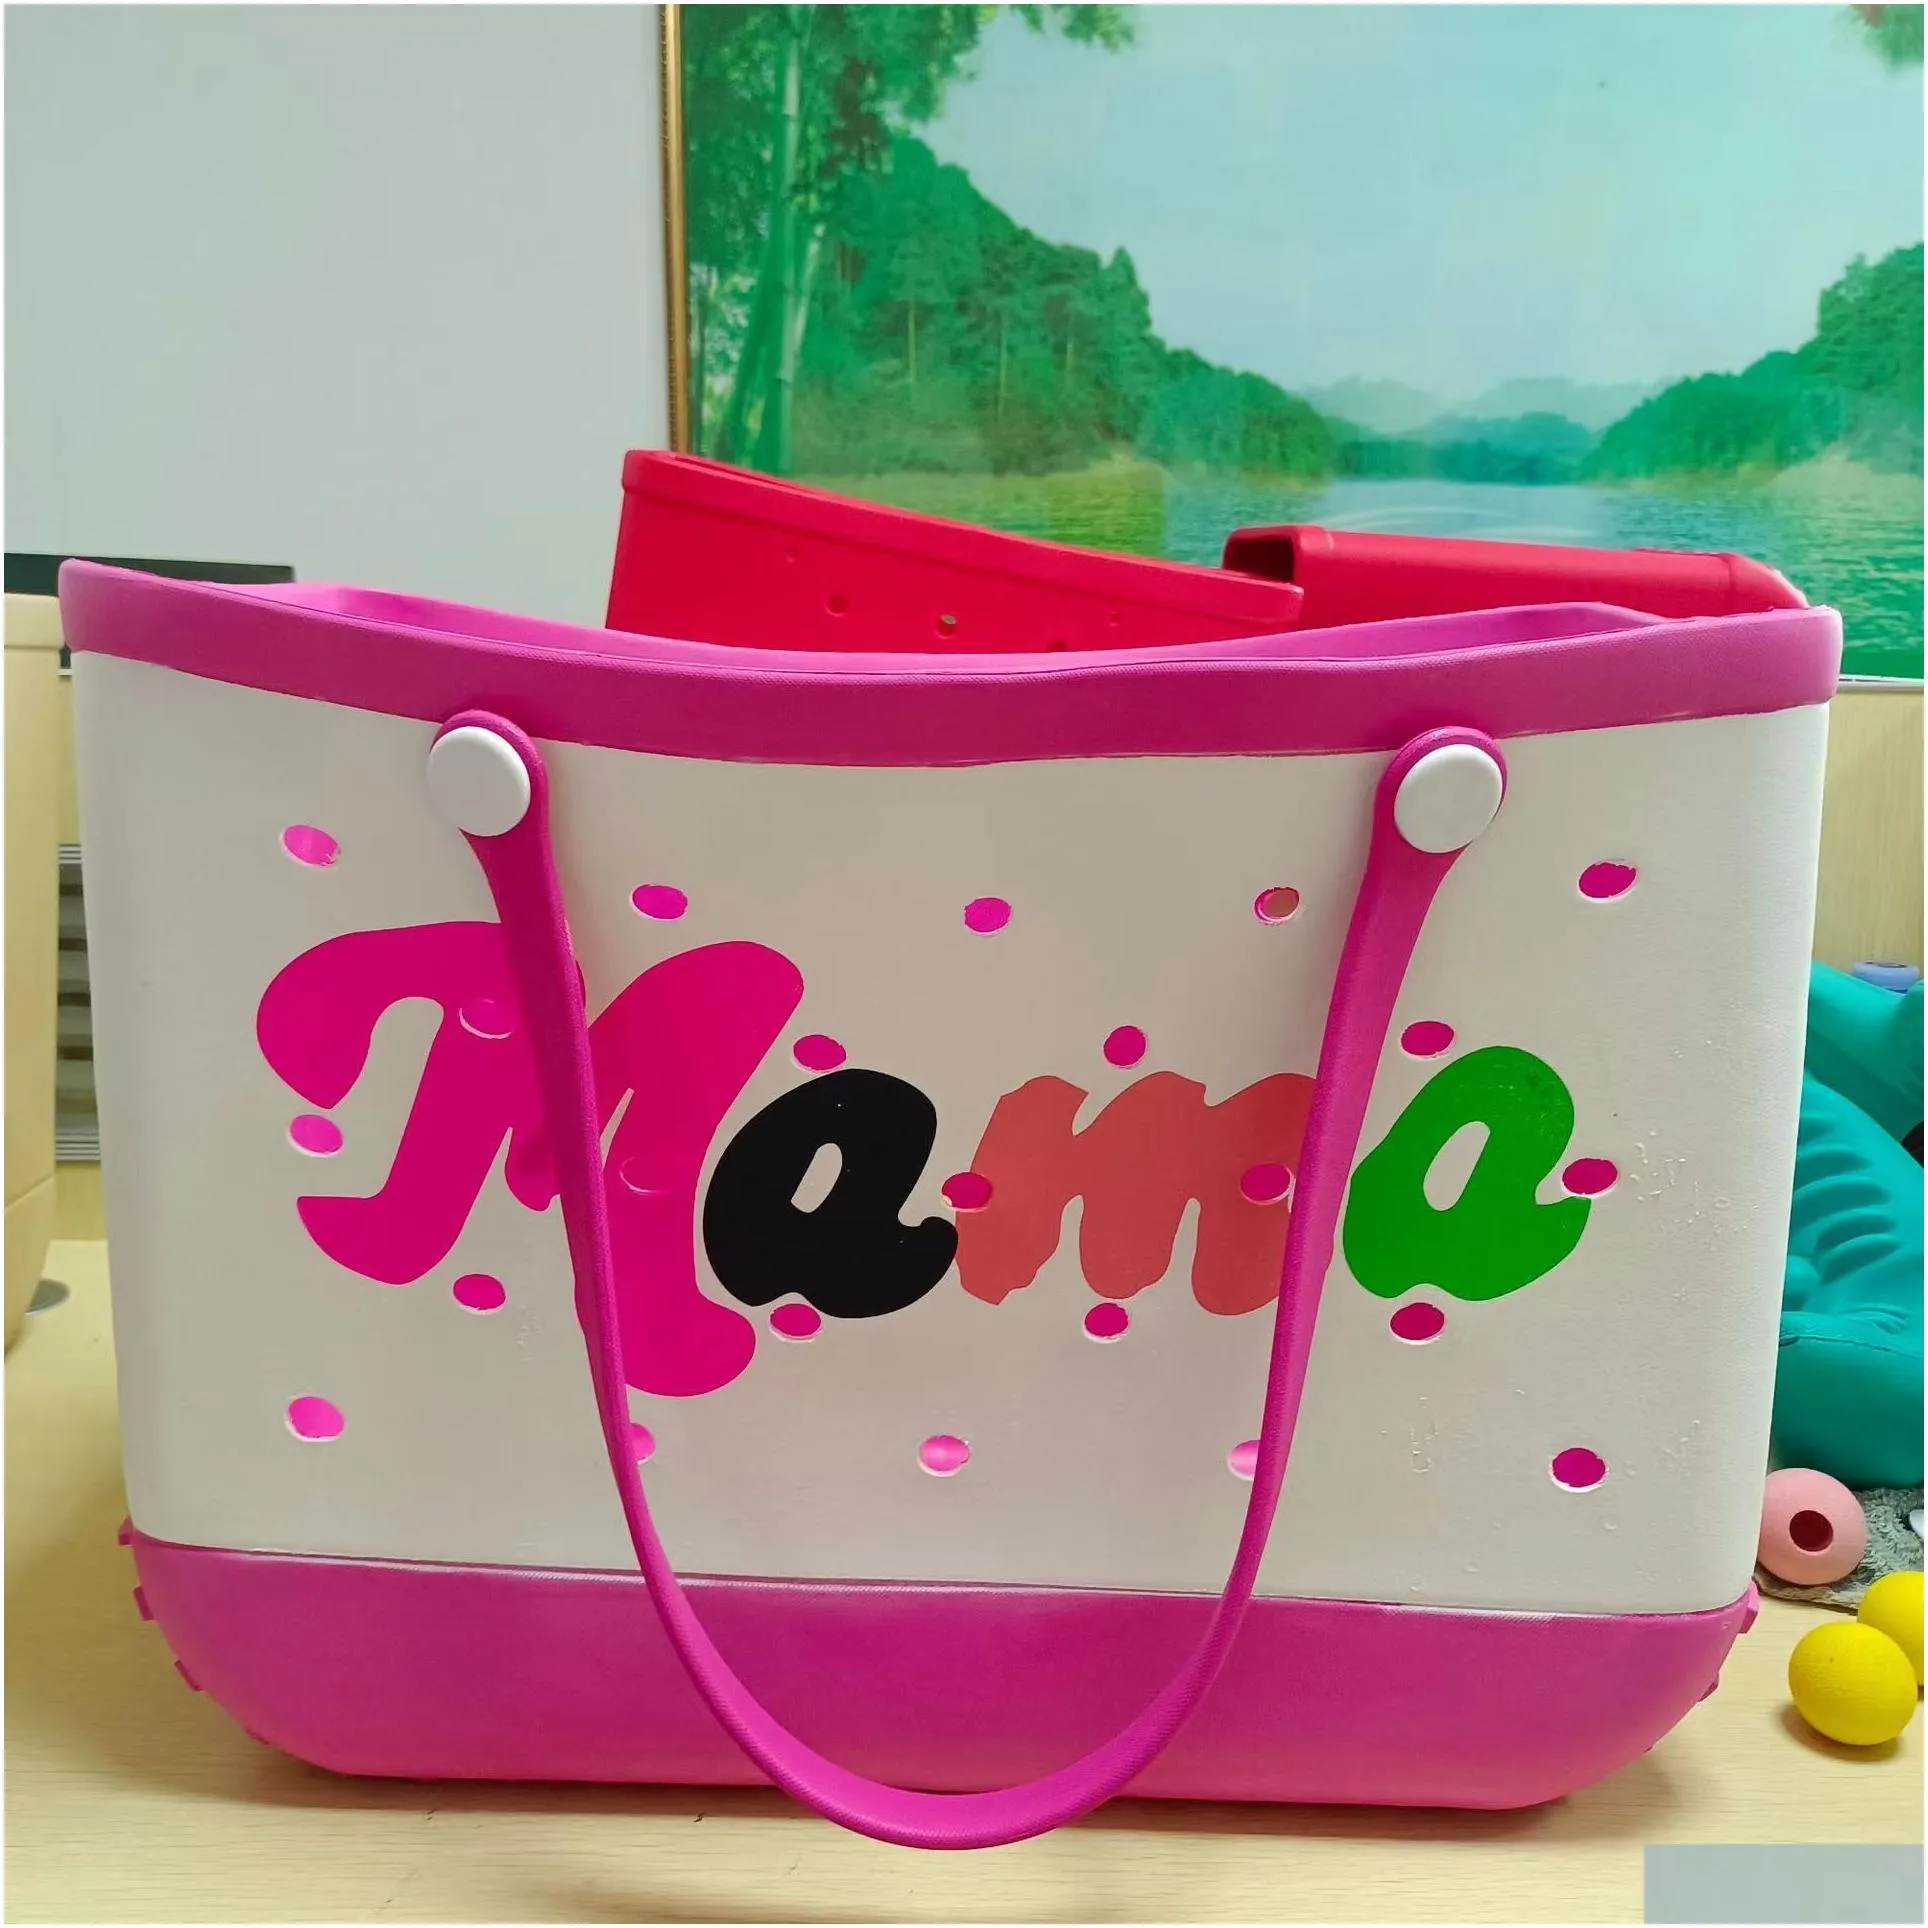 waterproof woman eva tote large shopping basket bags washable beach silicone bogg bag purse eco jelly candy lady handbags